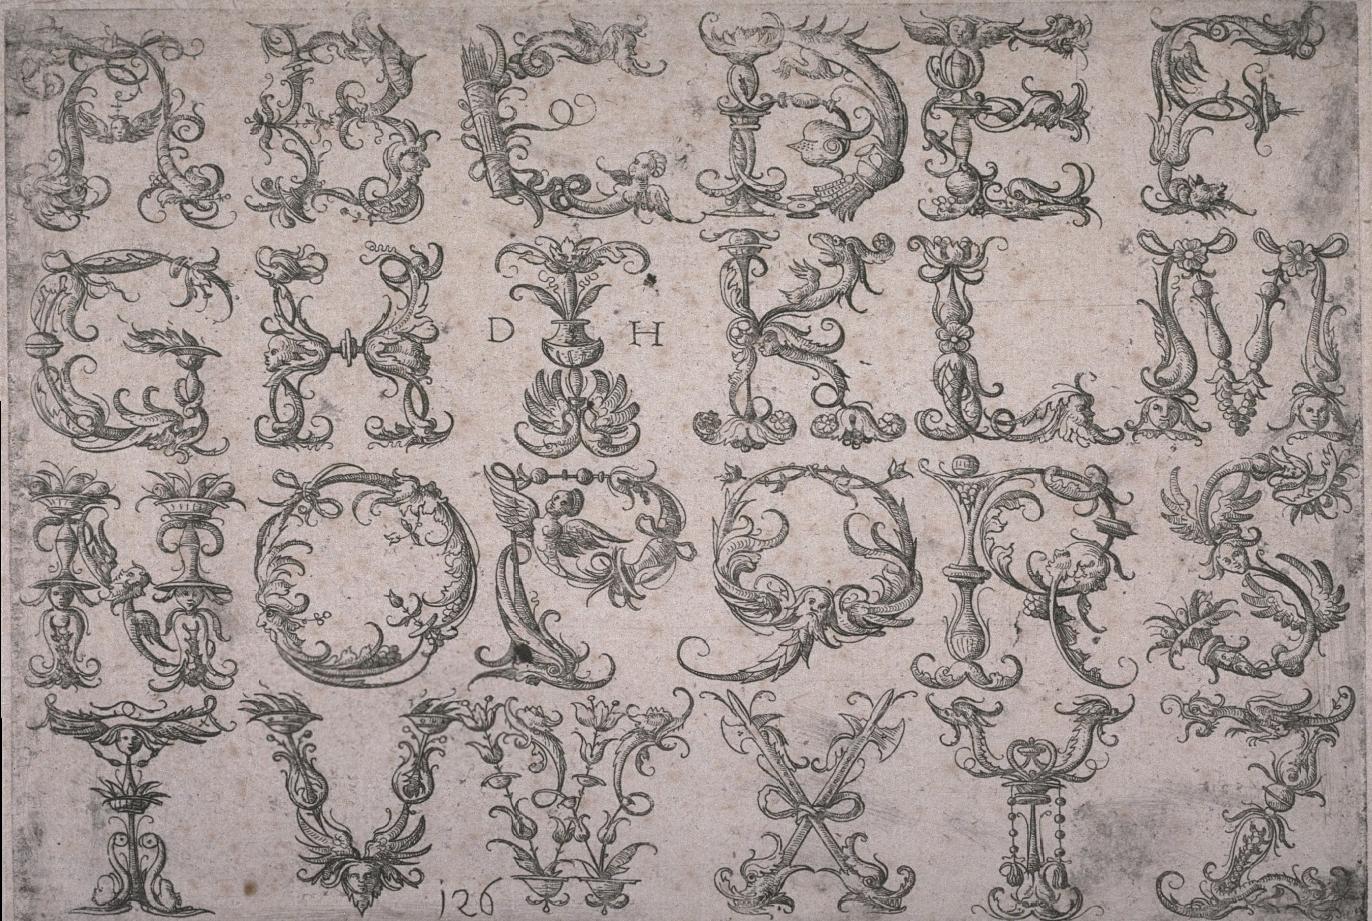 [Alphabet+of+Capital+Roman+letters+with+metaphorical+ornaments.JPG]